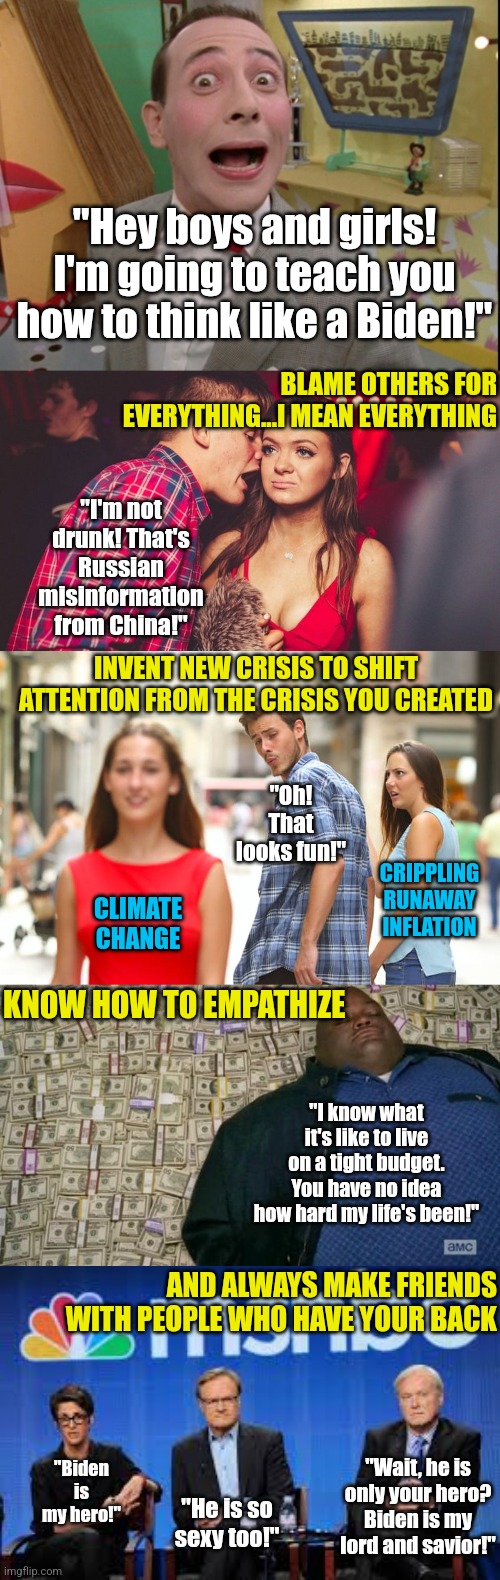 Why did they invent censorship? Probably politics. | "Hey boys and girls! I'm going to teach you how to think like a Biden!"; BLAME OTHERS FOR EVERYTHING...I MEAN EVERYTHING; "I'm not drunk! That's Russian misinformation from China!"; INVENT NEW CRISIS TO SHIFT ATTENTION FROM THE CRISIS YOU CREATED; "Oh! That looks fun!"; CRIPPLING RUNAWAY INFLATION; CLIMATE CHANGE; KNOW HOW TO EMPATHIZE; "I know what it's like to live on a tight budget. You have no idea how hard my life's been!"; AND ALWAYS MAKE FRIENDS WITH PEOPLE WHO HAVE YOUR BACK; "Biden is my hero!"; "Wait, he is only your hero? Biden is my lord and savior!"; "He is so sexy too!" | image tagged in guy talking to girl in club,distracted boyfriend,msnbc hosts are stupid,democrats,liberal logic,president_joe_biden | made w/ Imgflip meme maker